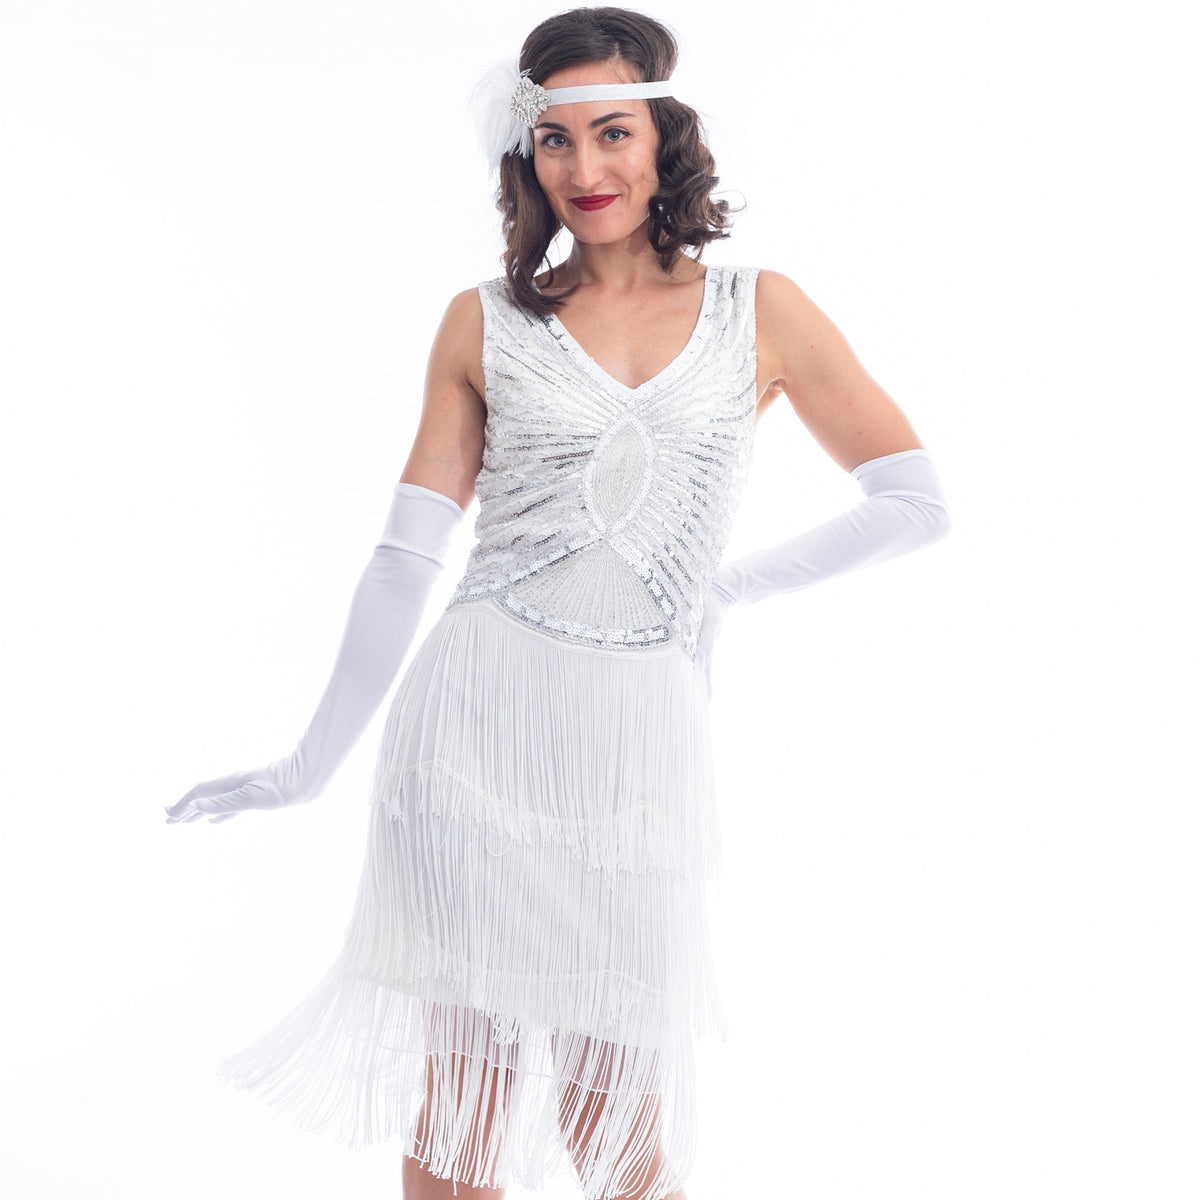 A close view vintage white gatsby dress with white beads, sequins and fringes around hem.